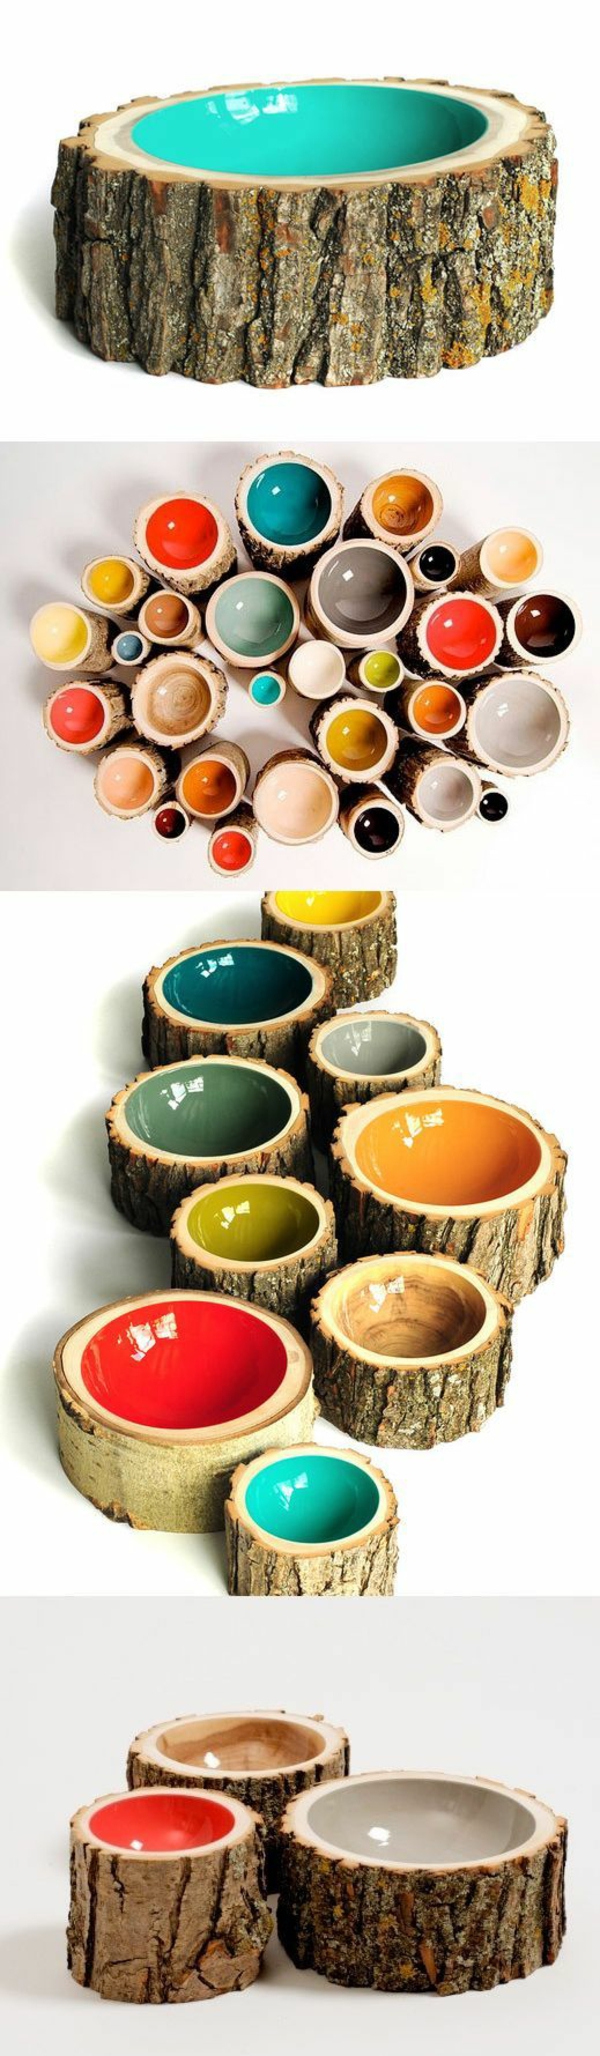 tree trunk decoration diy projects painted